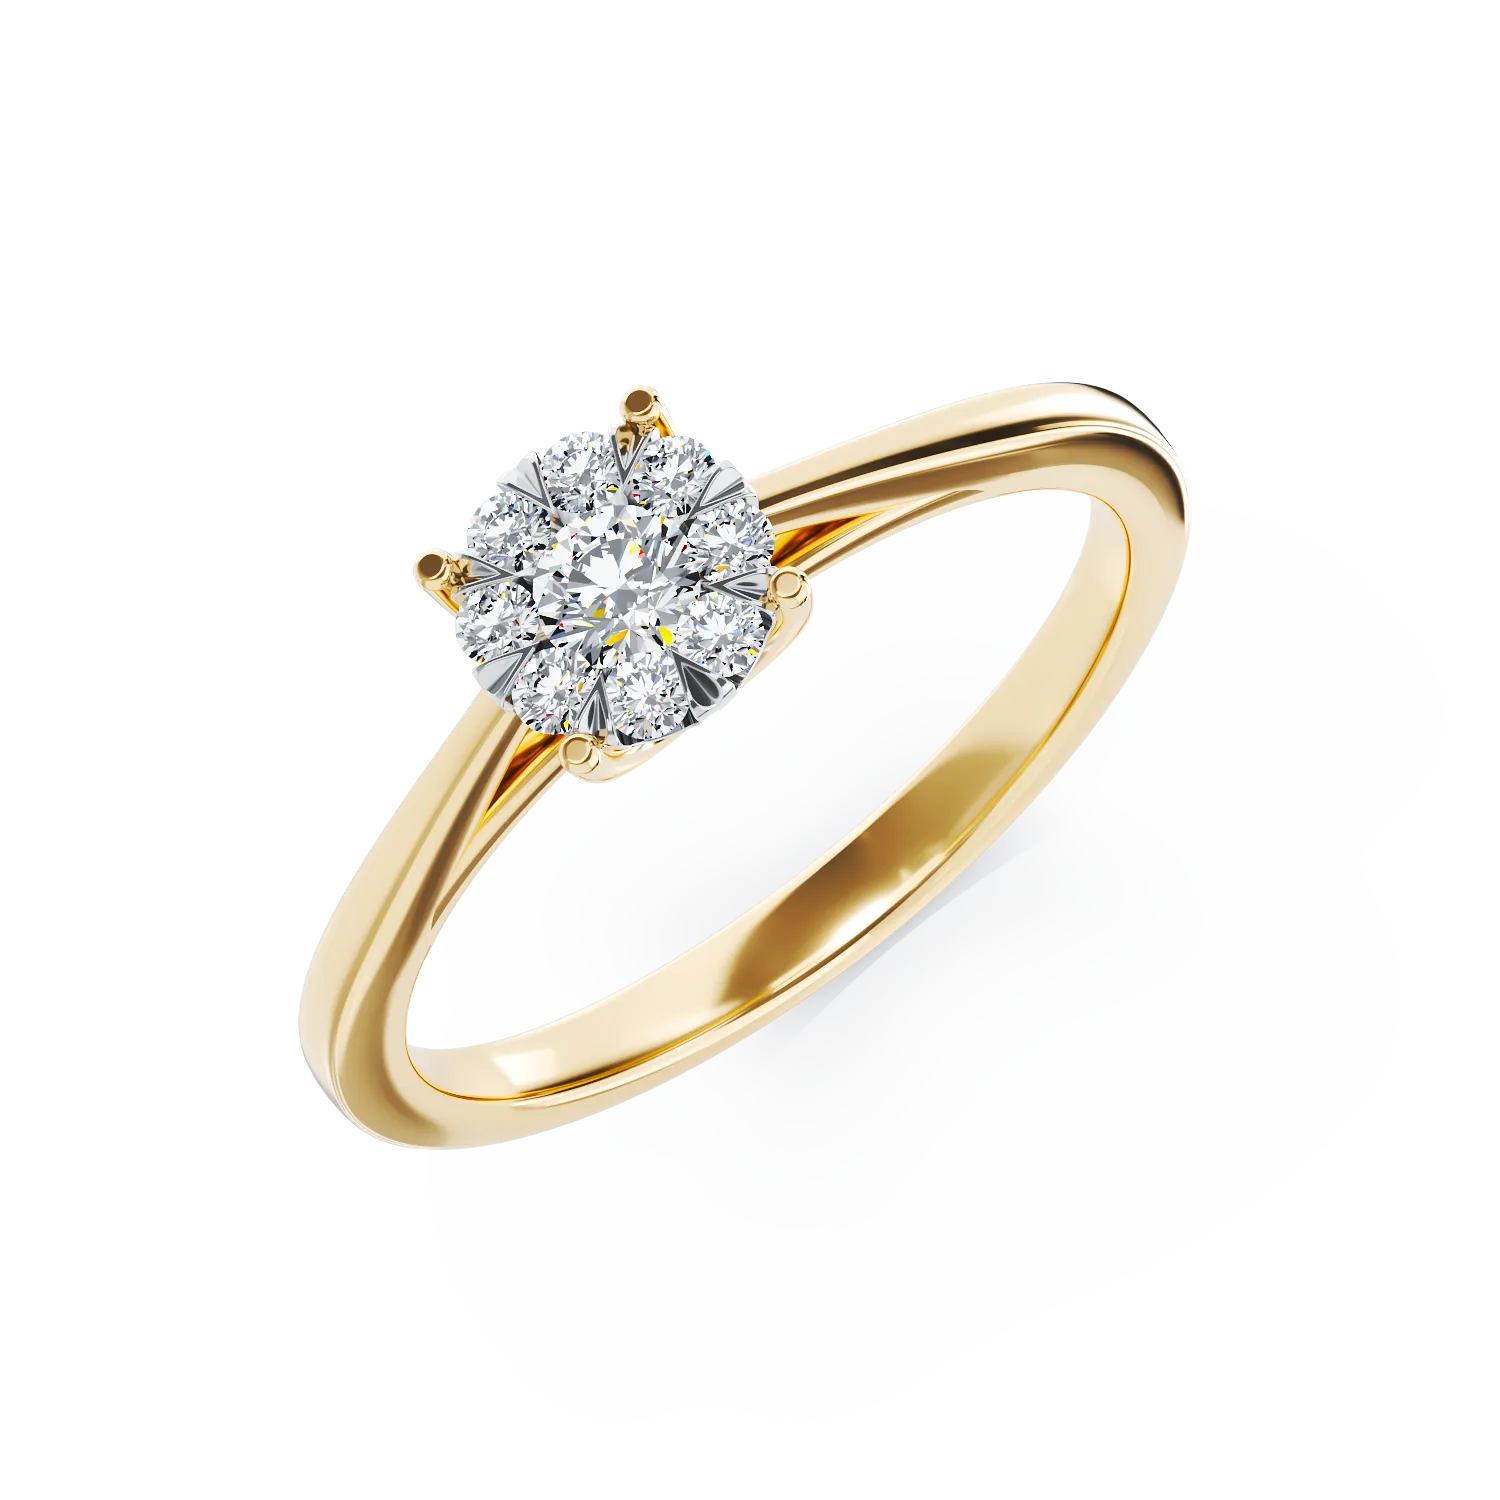 18K yellow gold engagement ring with 0.15ct diamonds